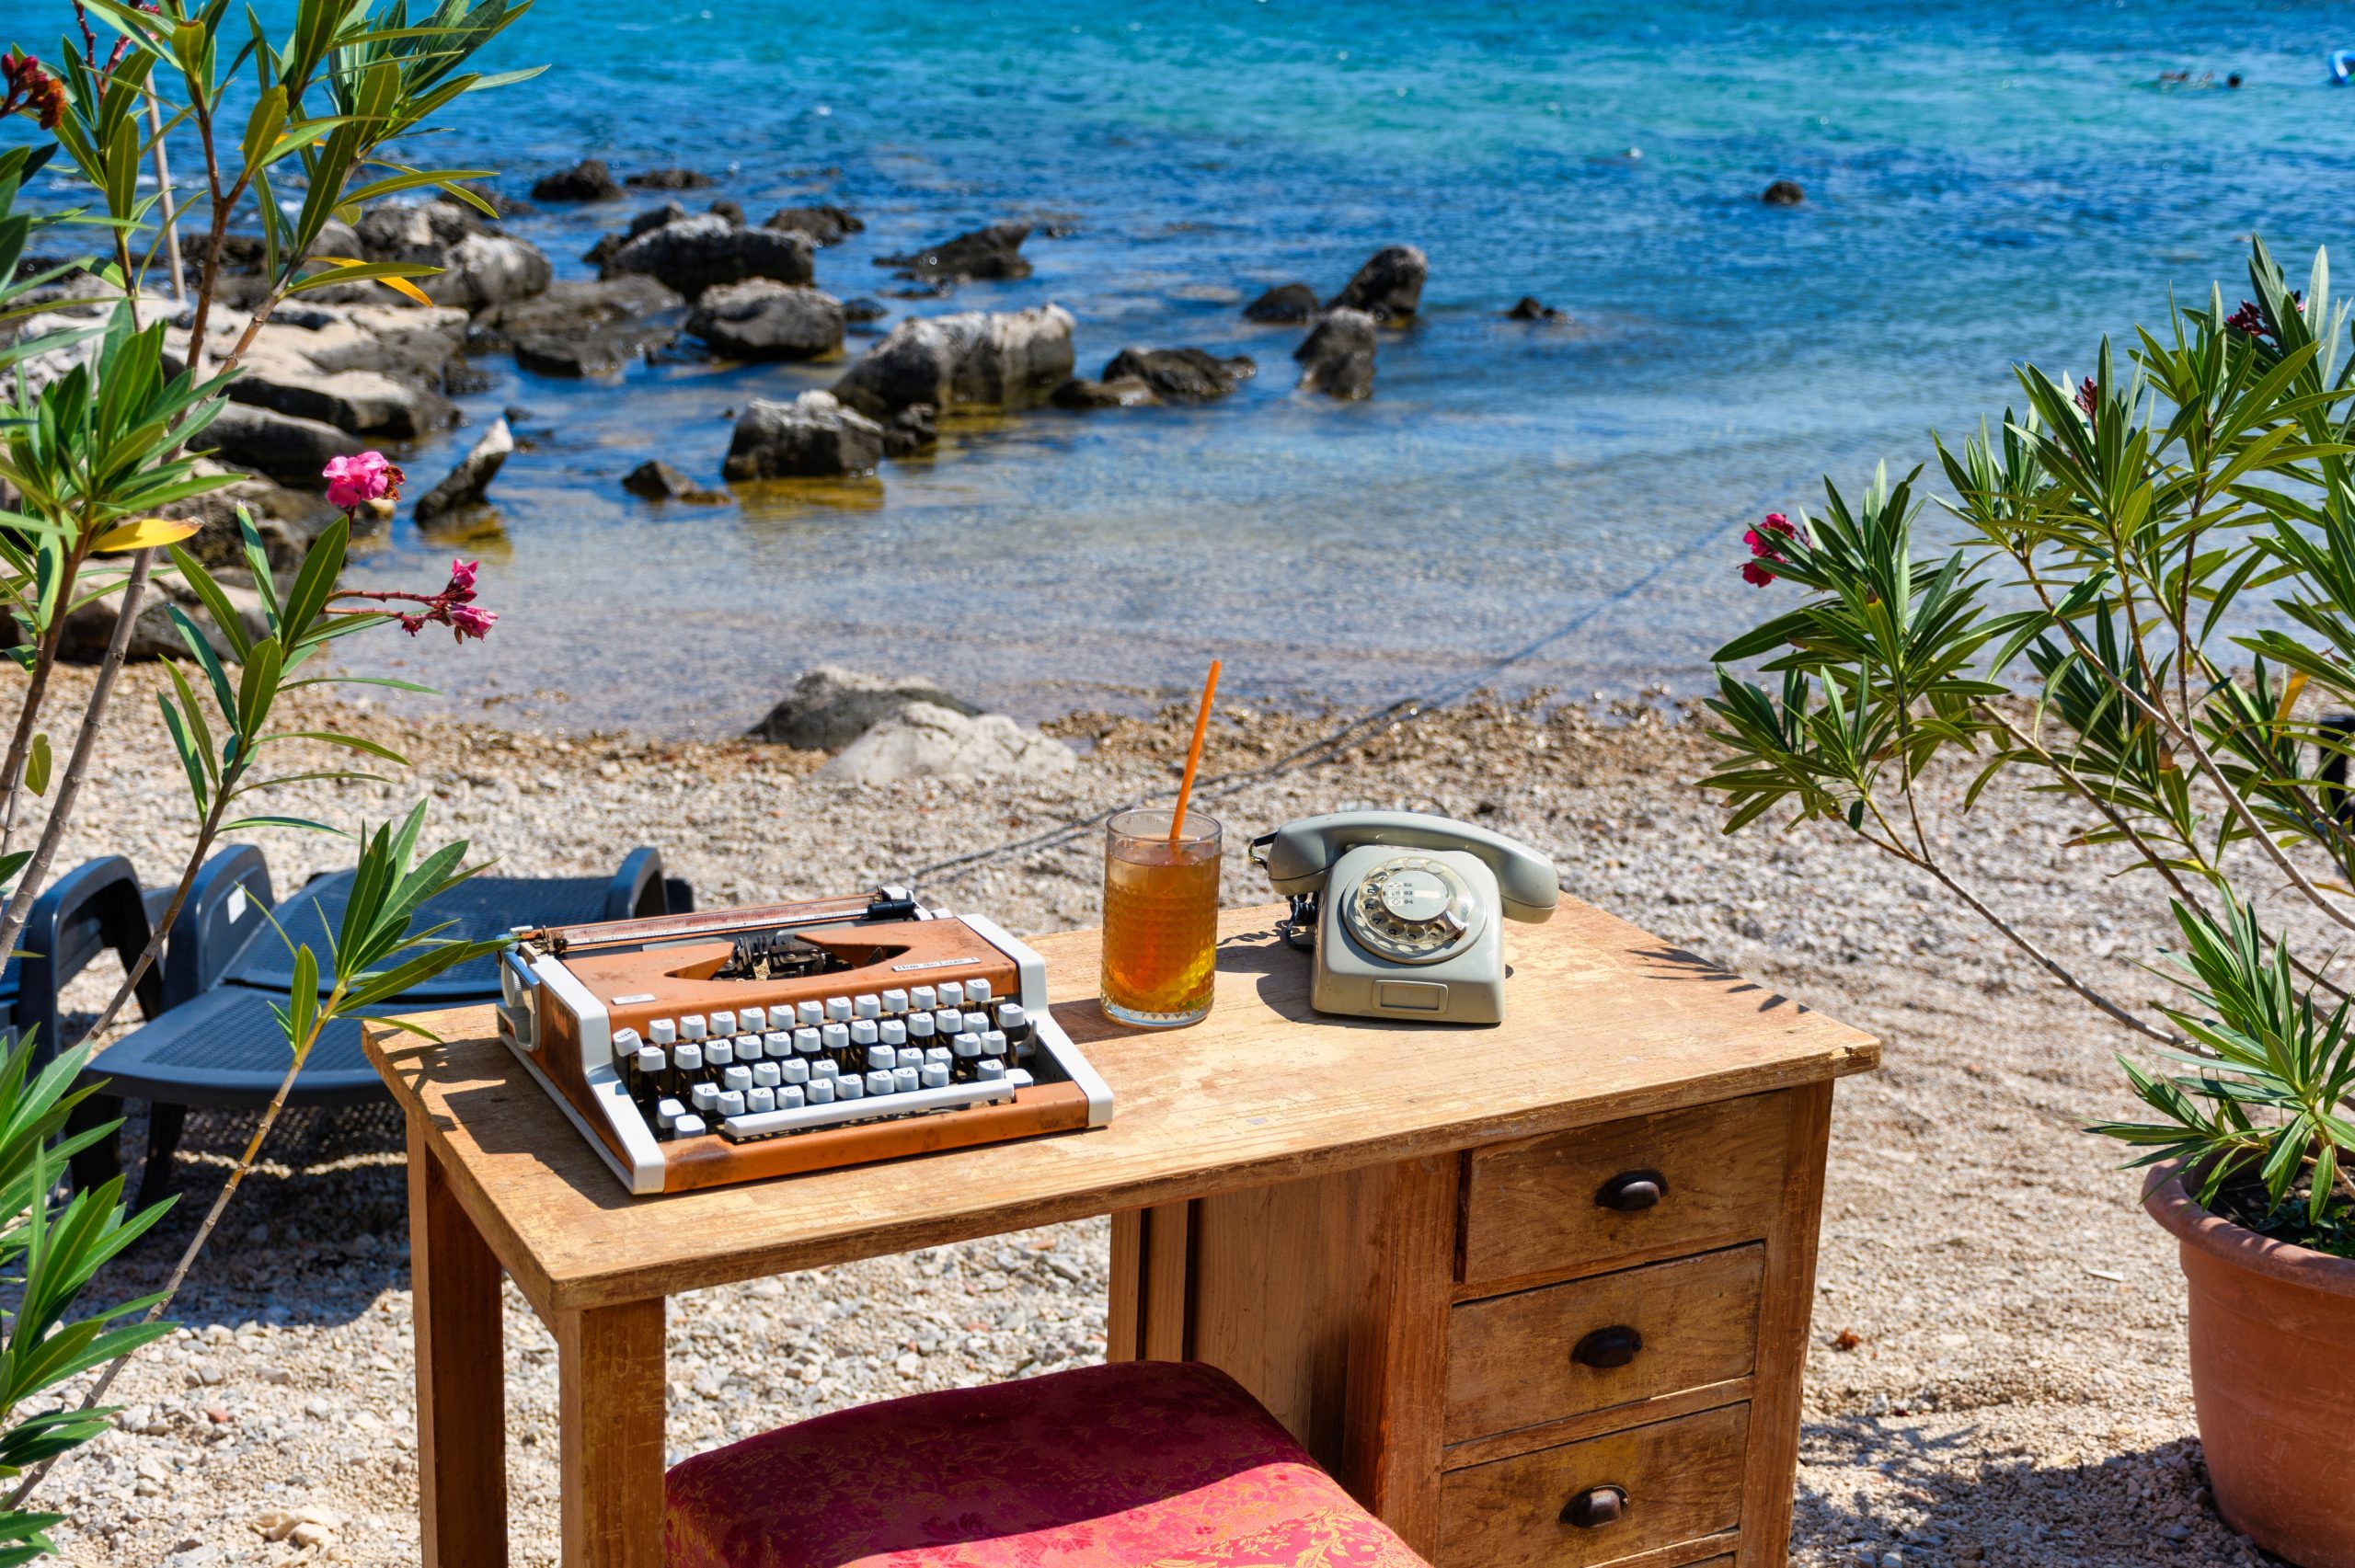 Vintage desk with a typewriter and an old phone. Glass of ice cold ice tea on old wooden table on beach.